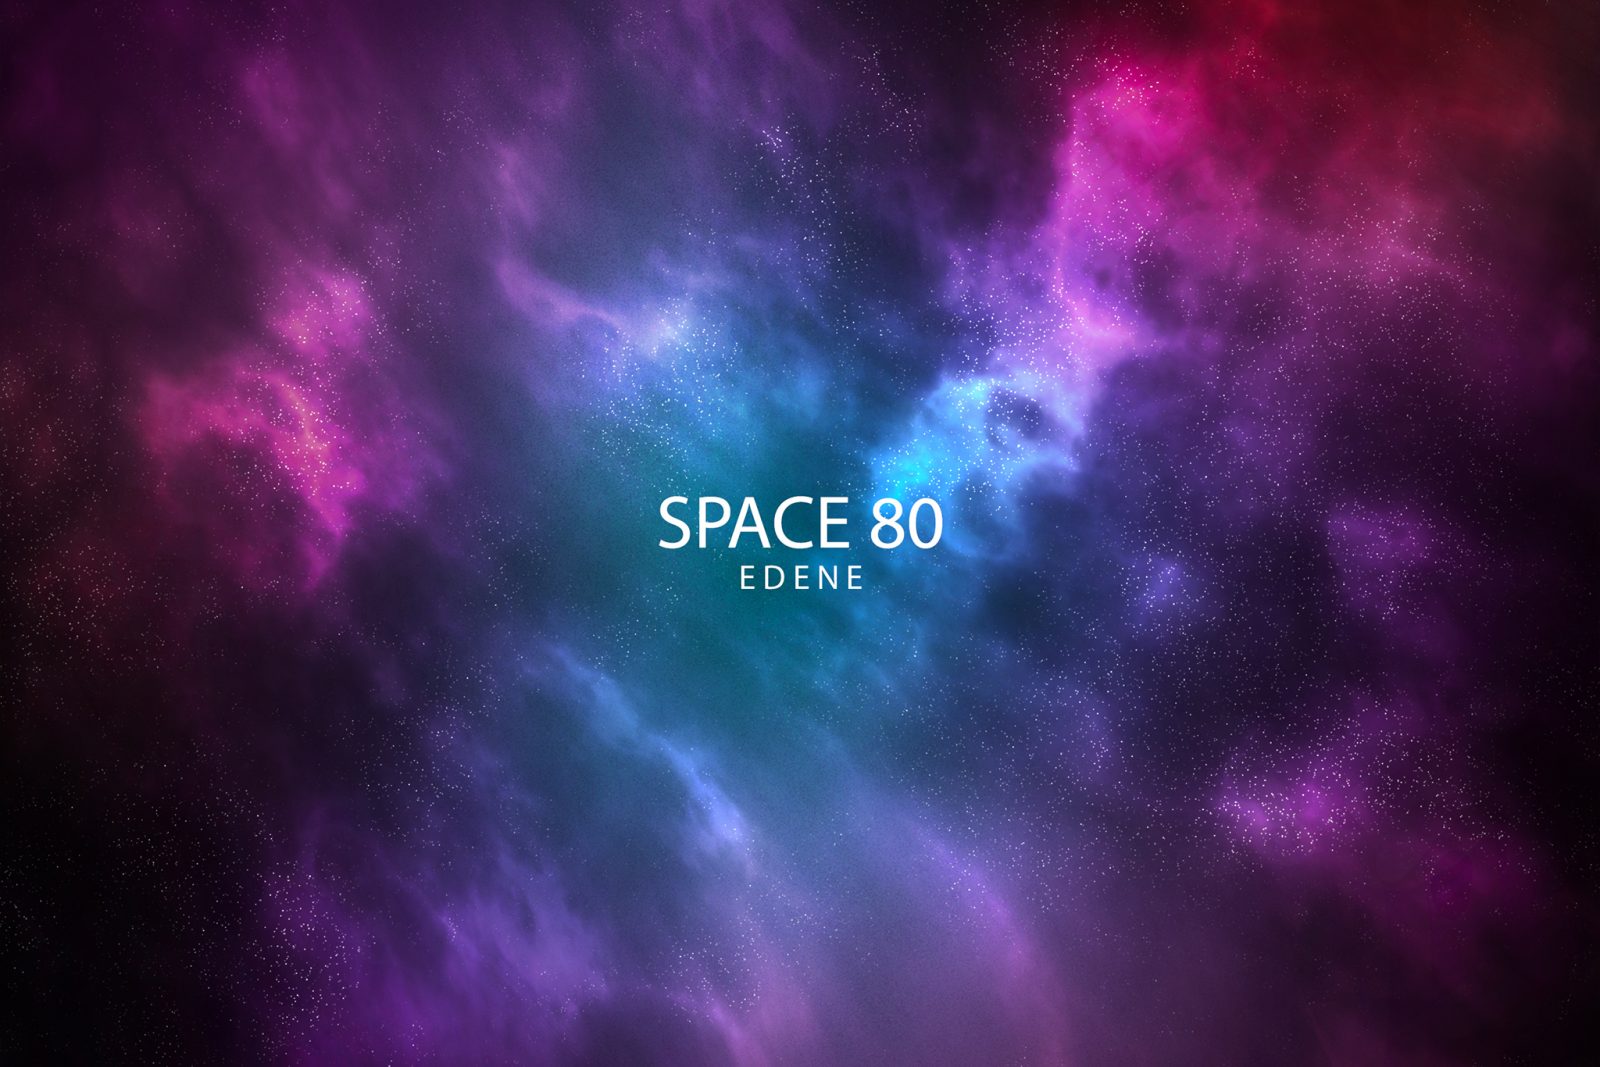 SPACE 80